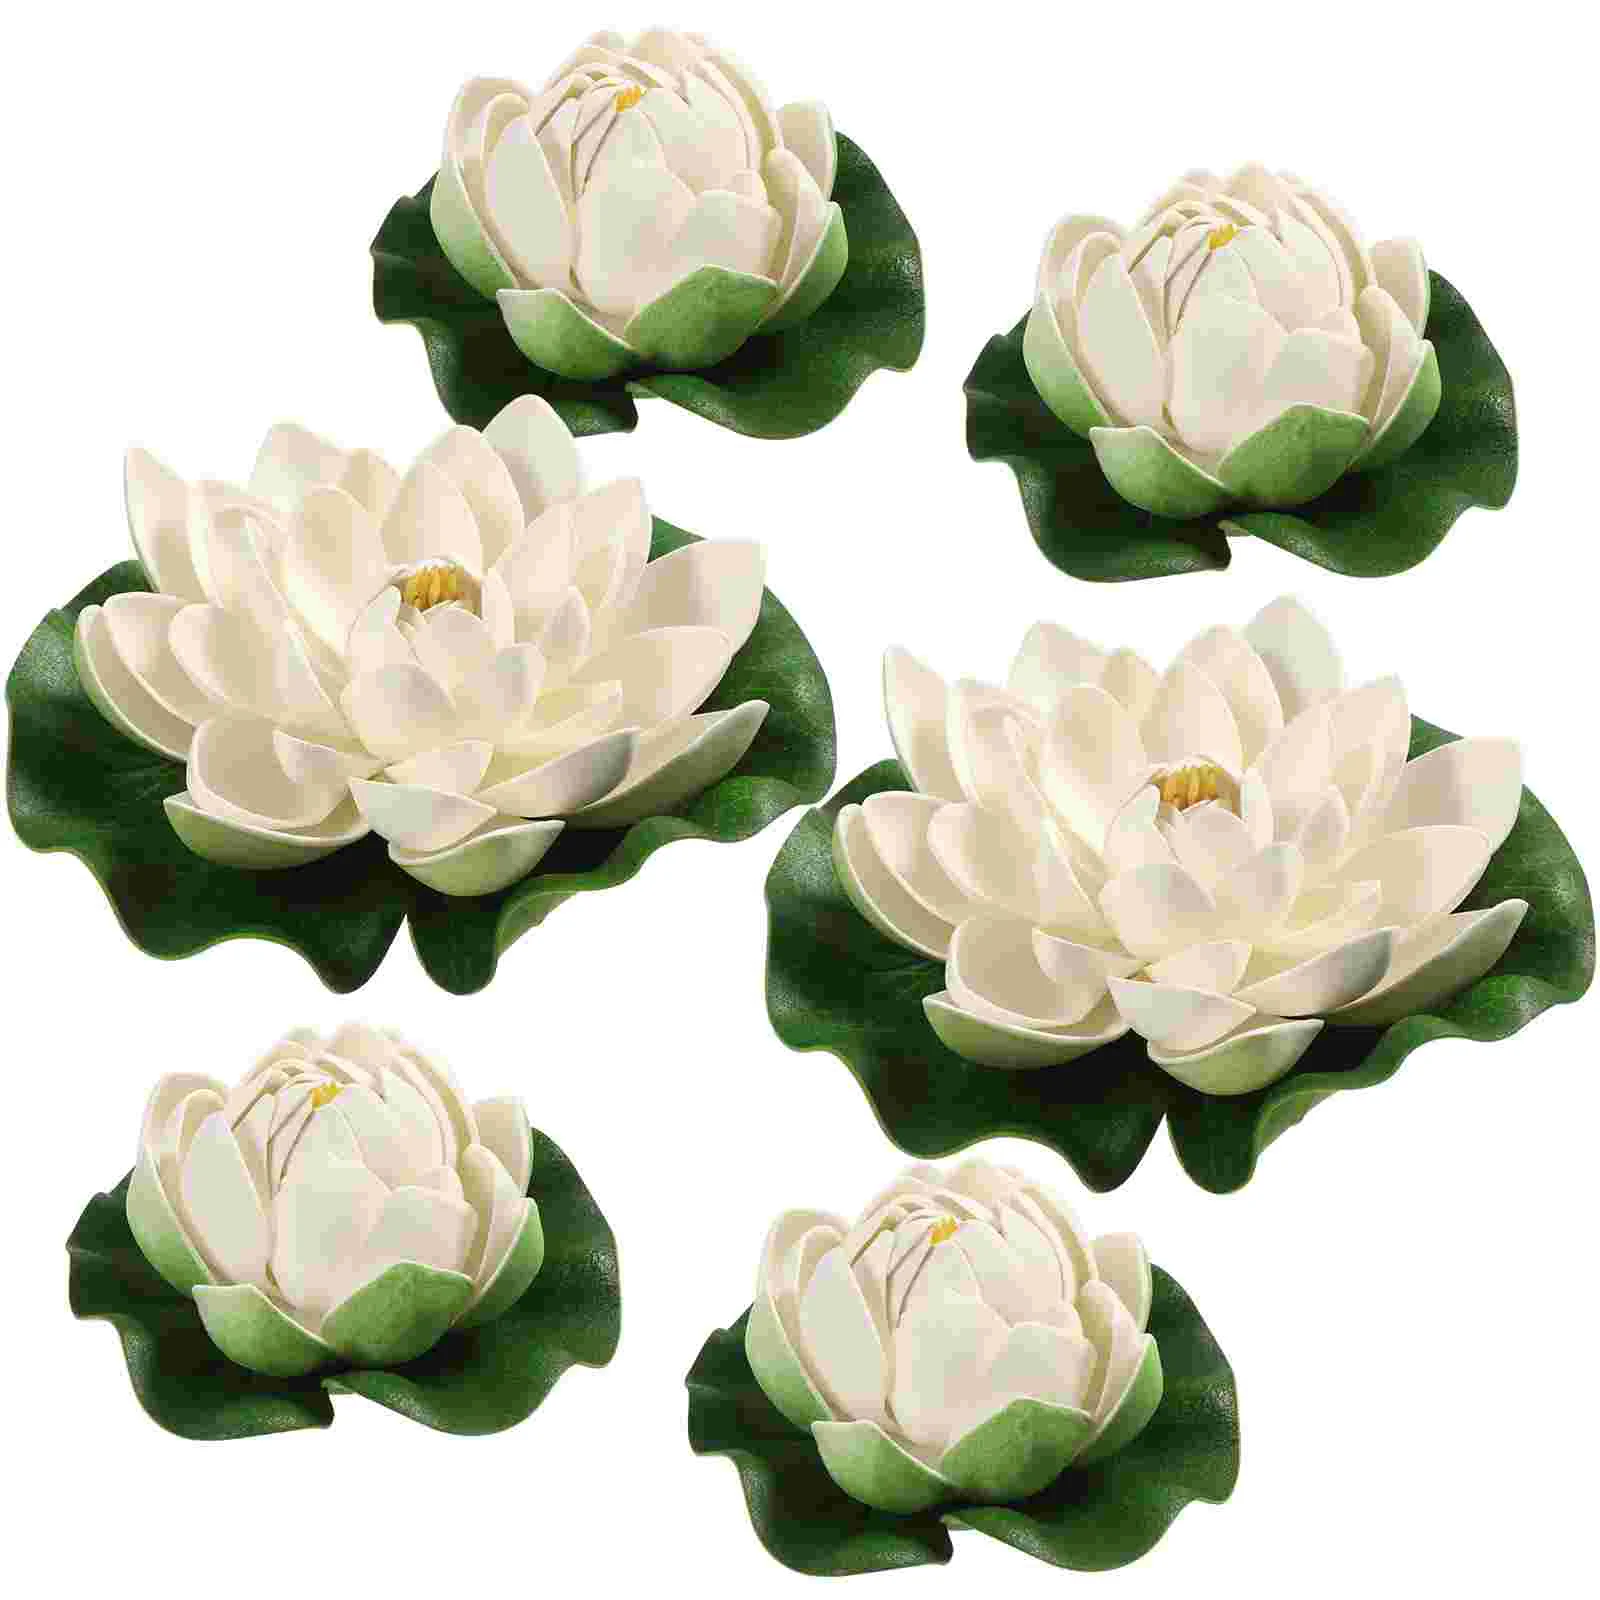 

Artificial Plants Indoor Floating Lotus False Water Lily Flower Pond Decor Lilies